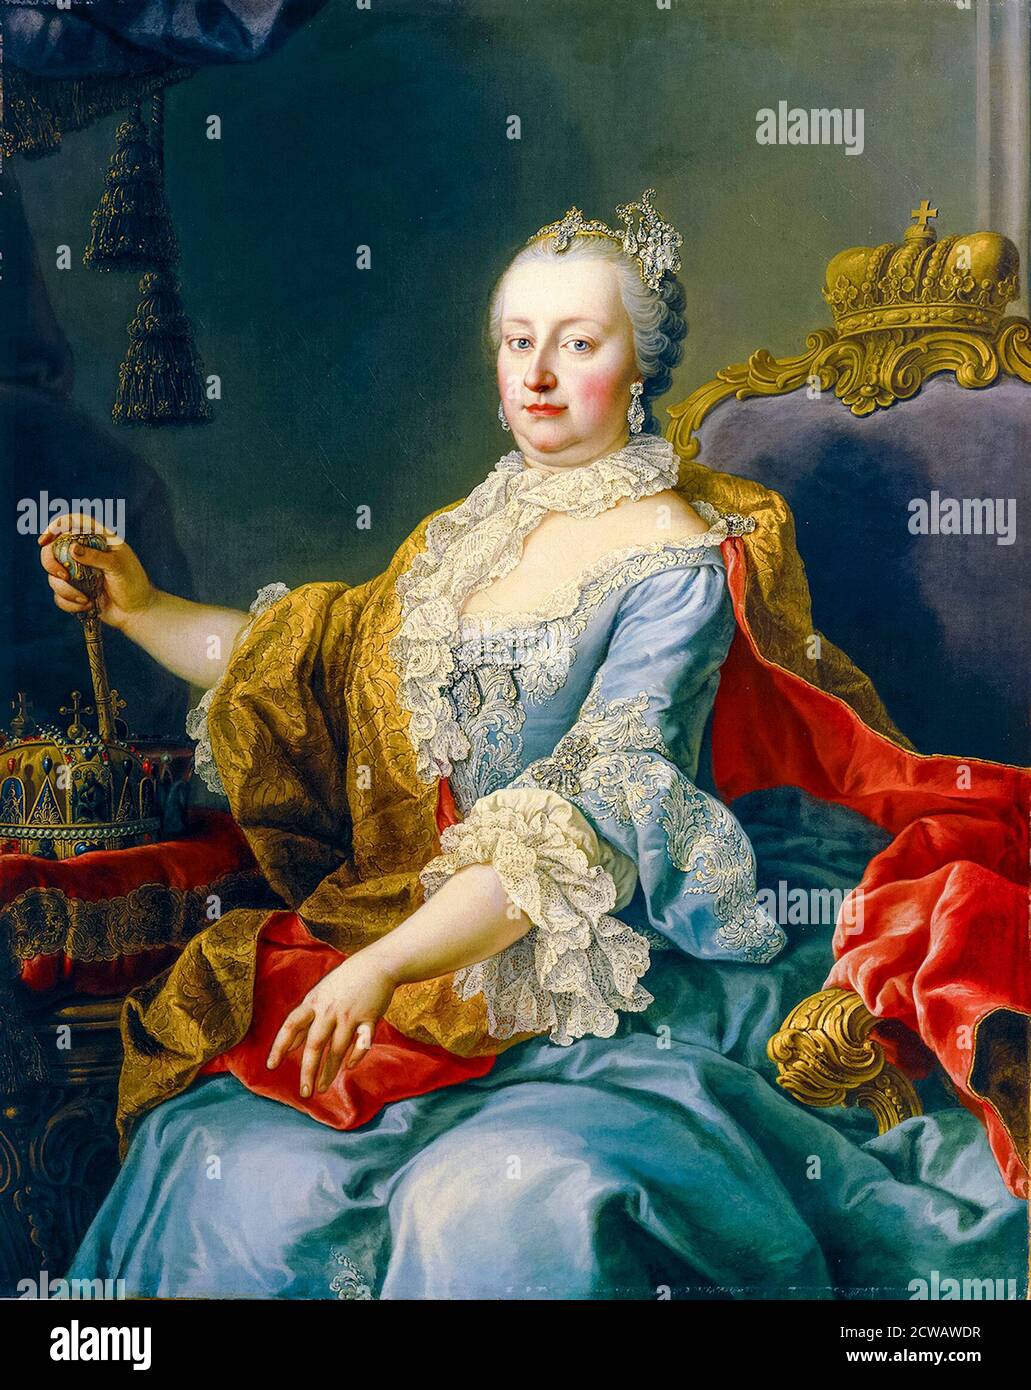 Maria Theresa (1717-1780), Archduchess of Austria, Queen of Hungary and Bohemia, Holy Roman Empress, portrait painting by Martin van Meytens, 1759 Stock Photo